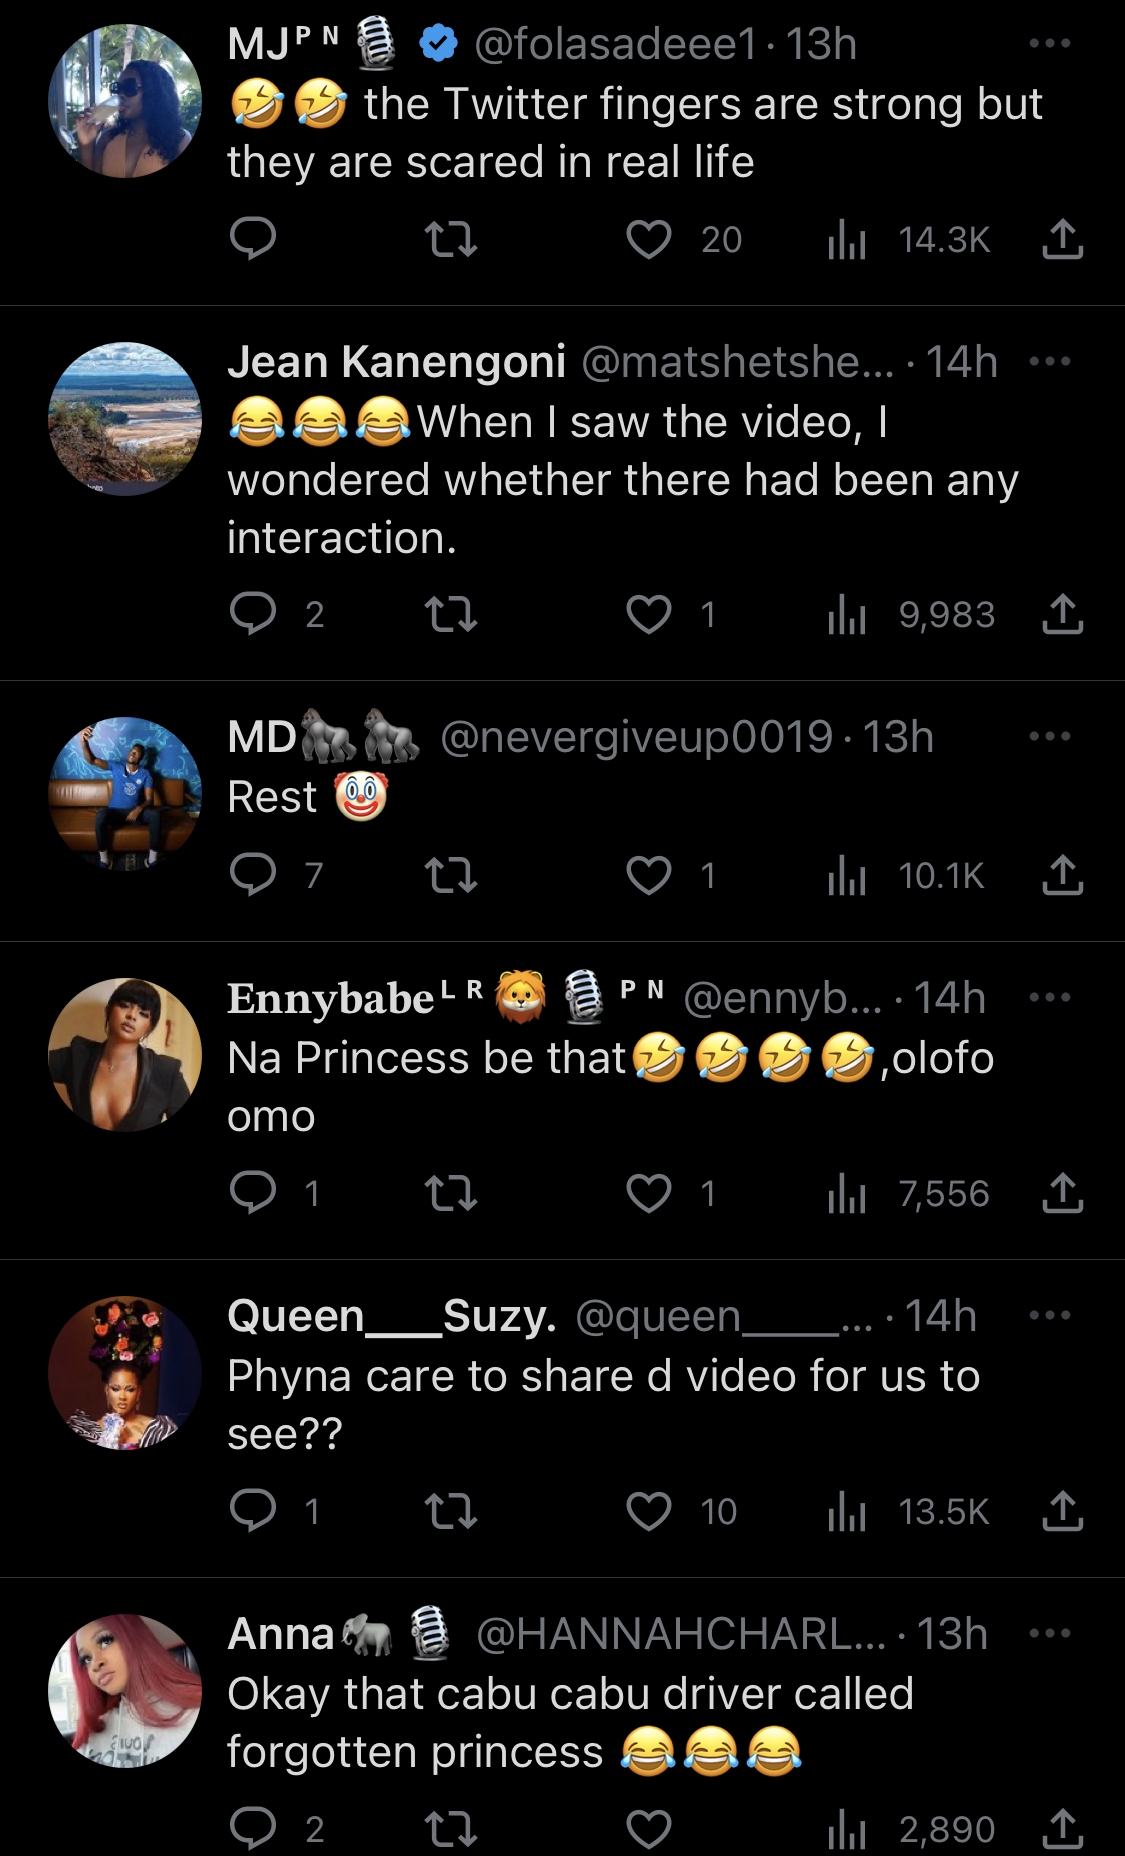 I met an EX-BBNaija housemate who’s my hater and I didn’t recognize her - Phyna mocks